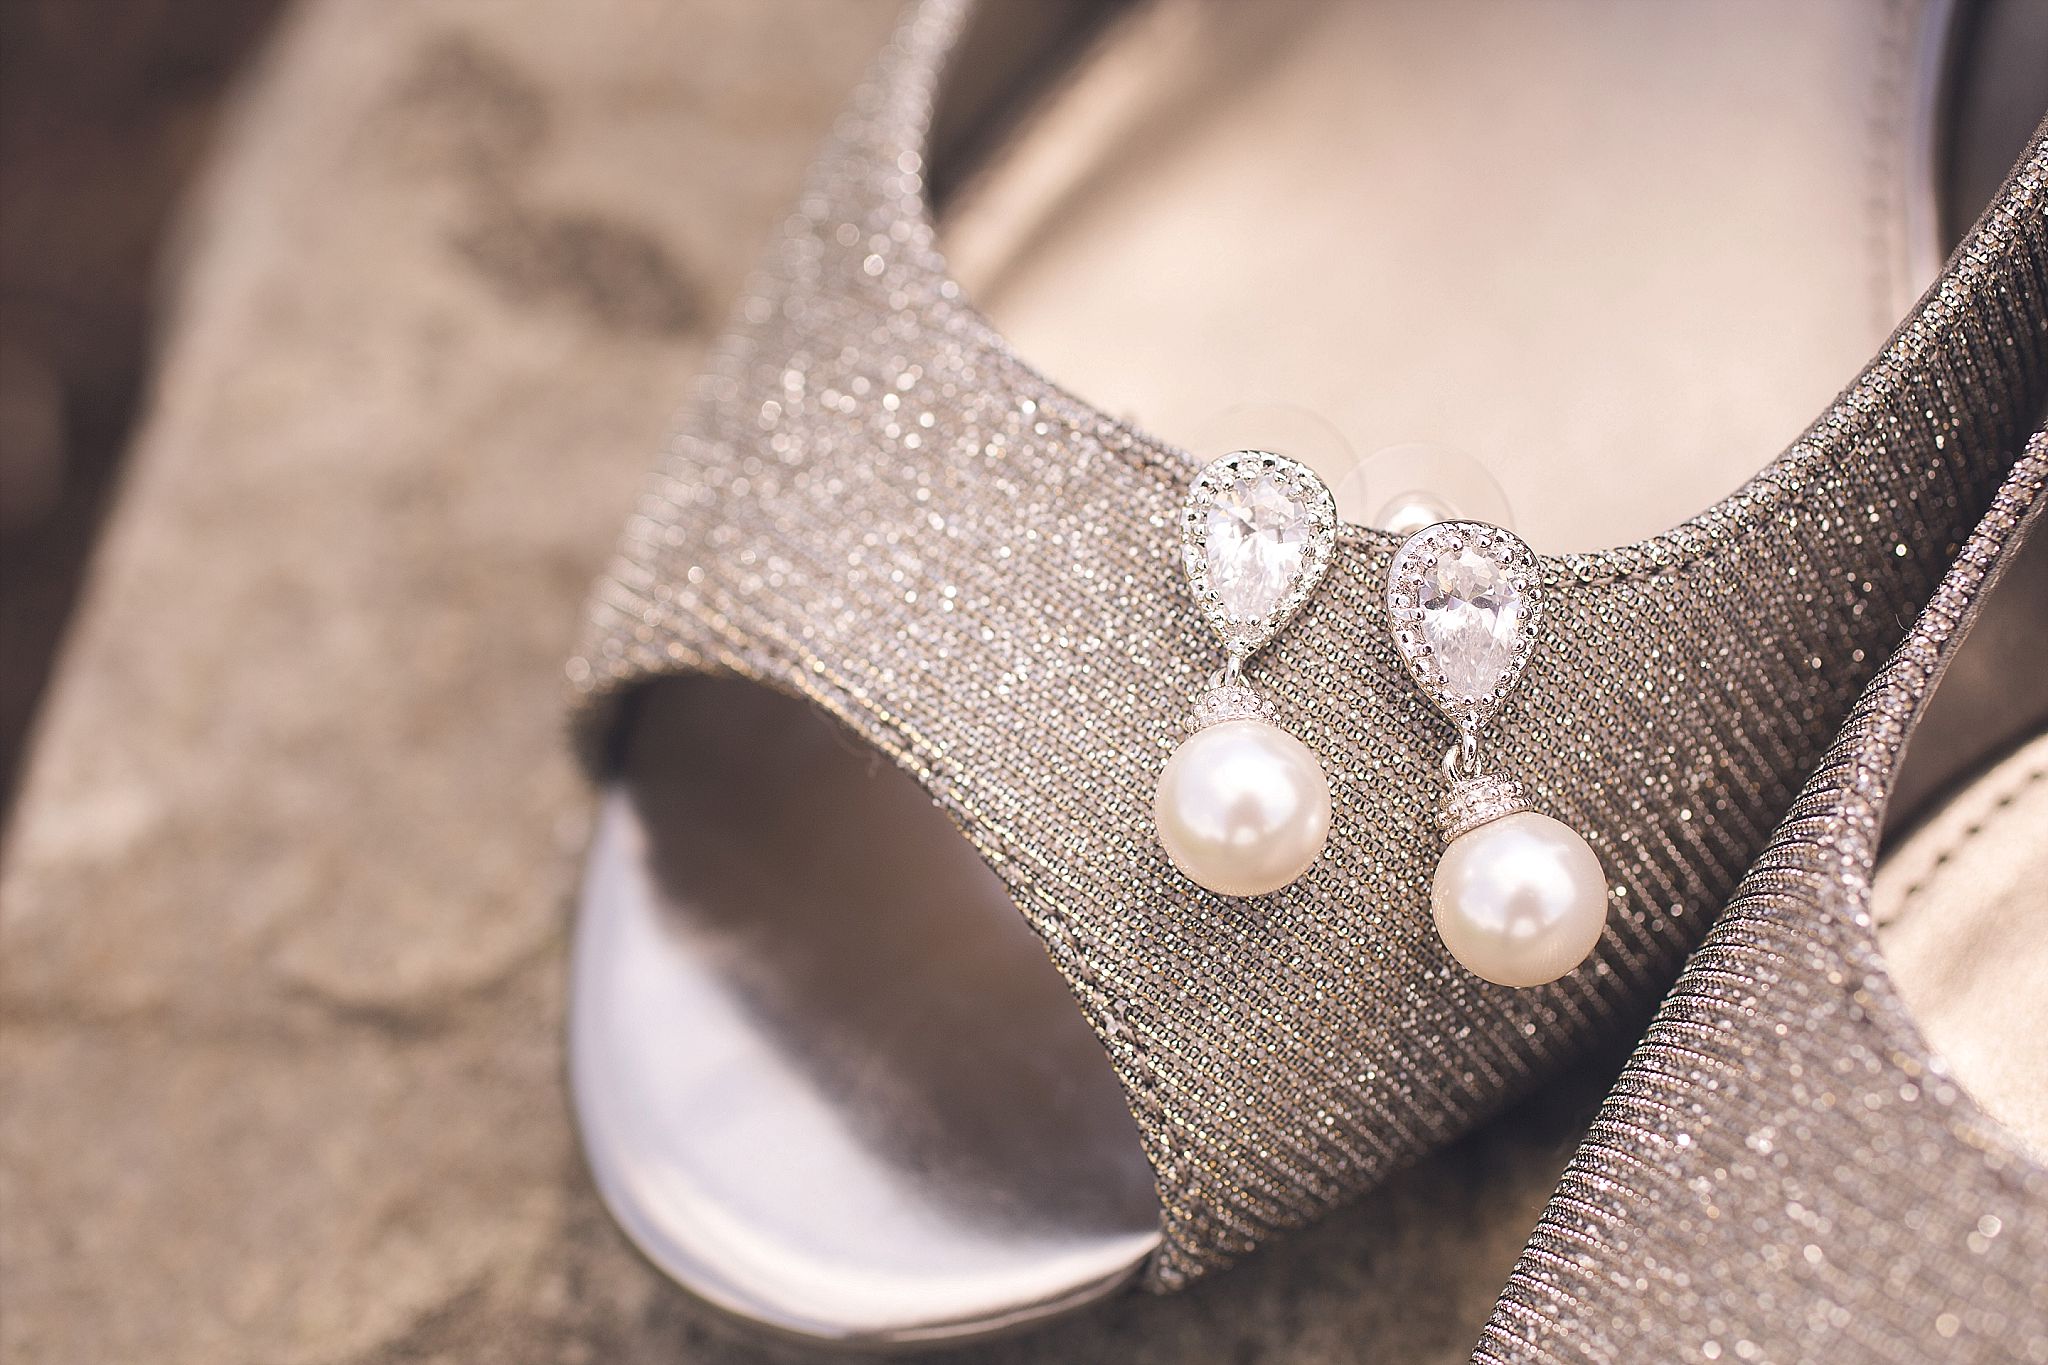 shoe and earrings wedding day details photography